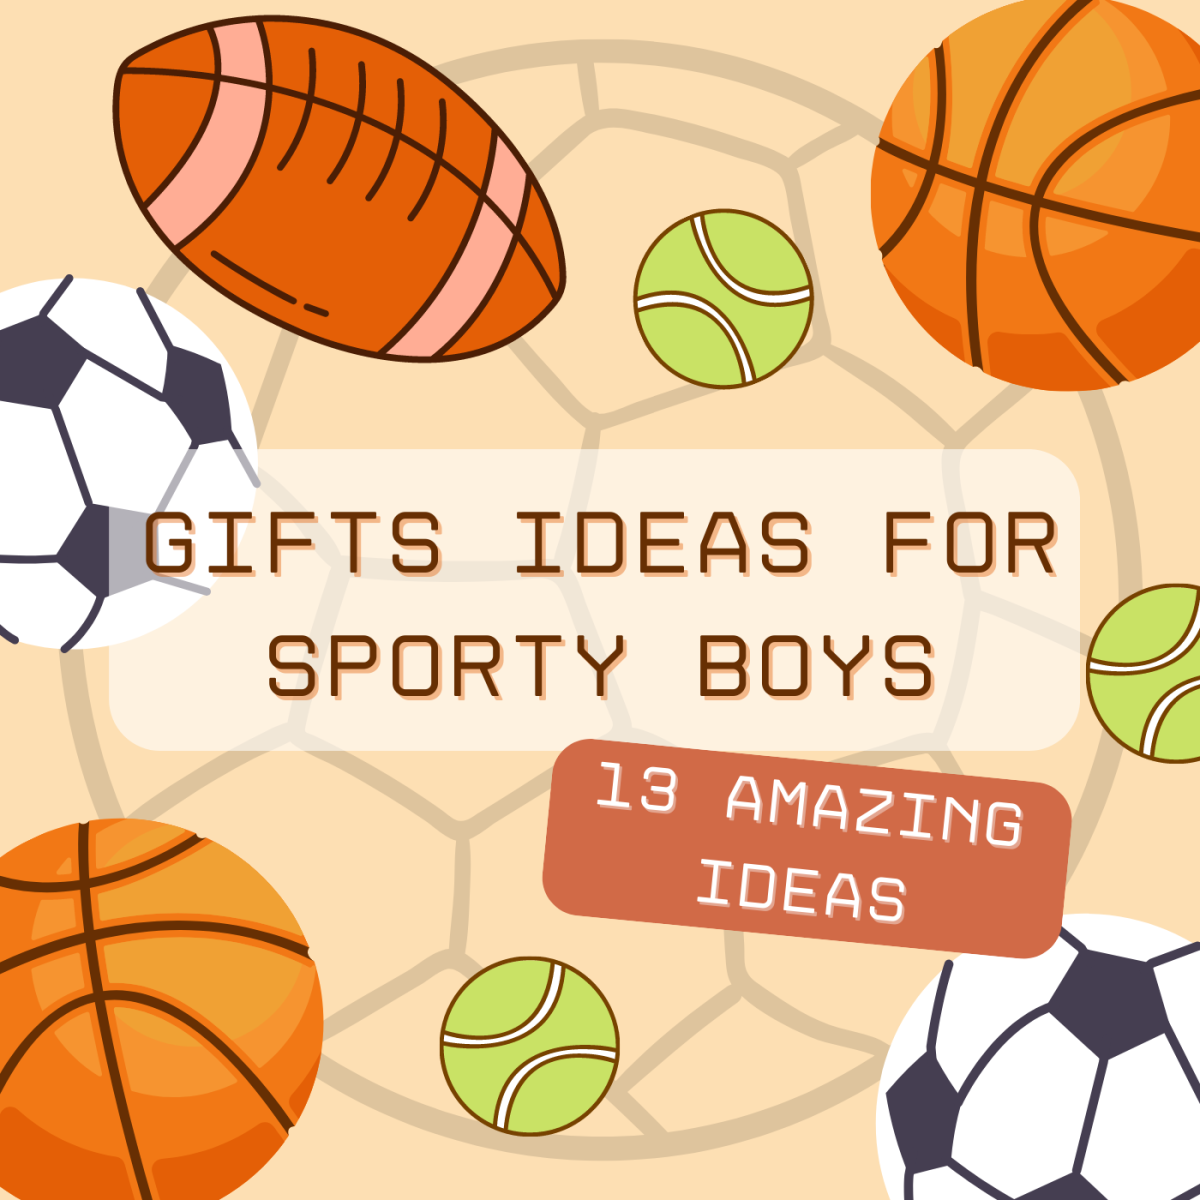 Gifts for guys who like sports and being active.